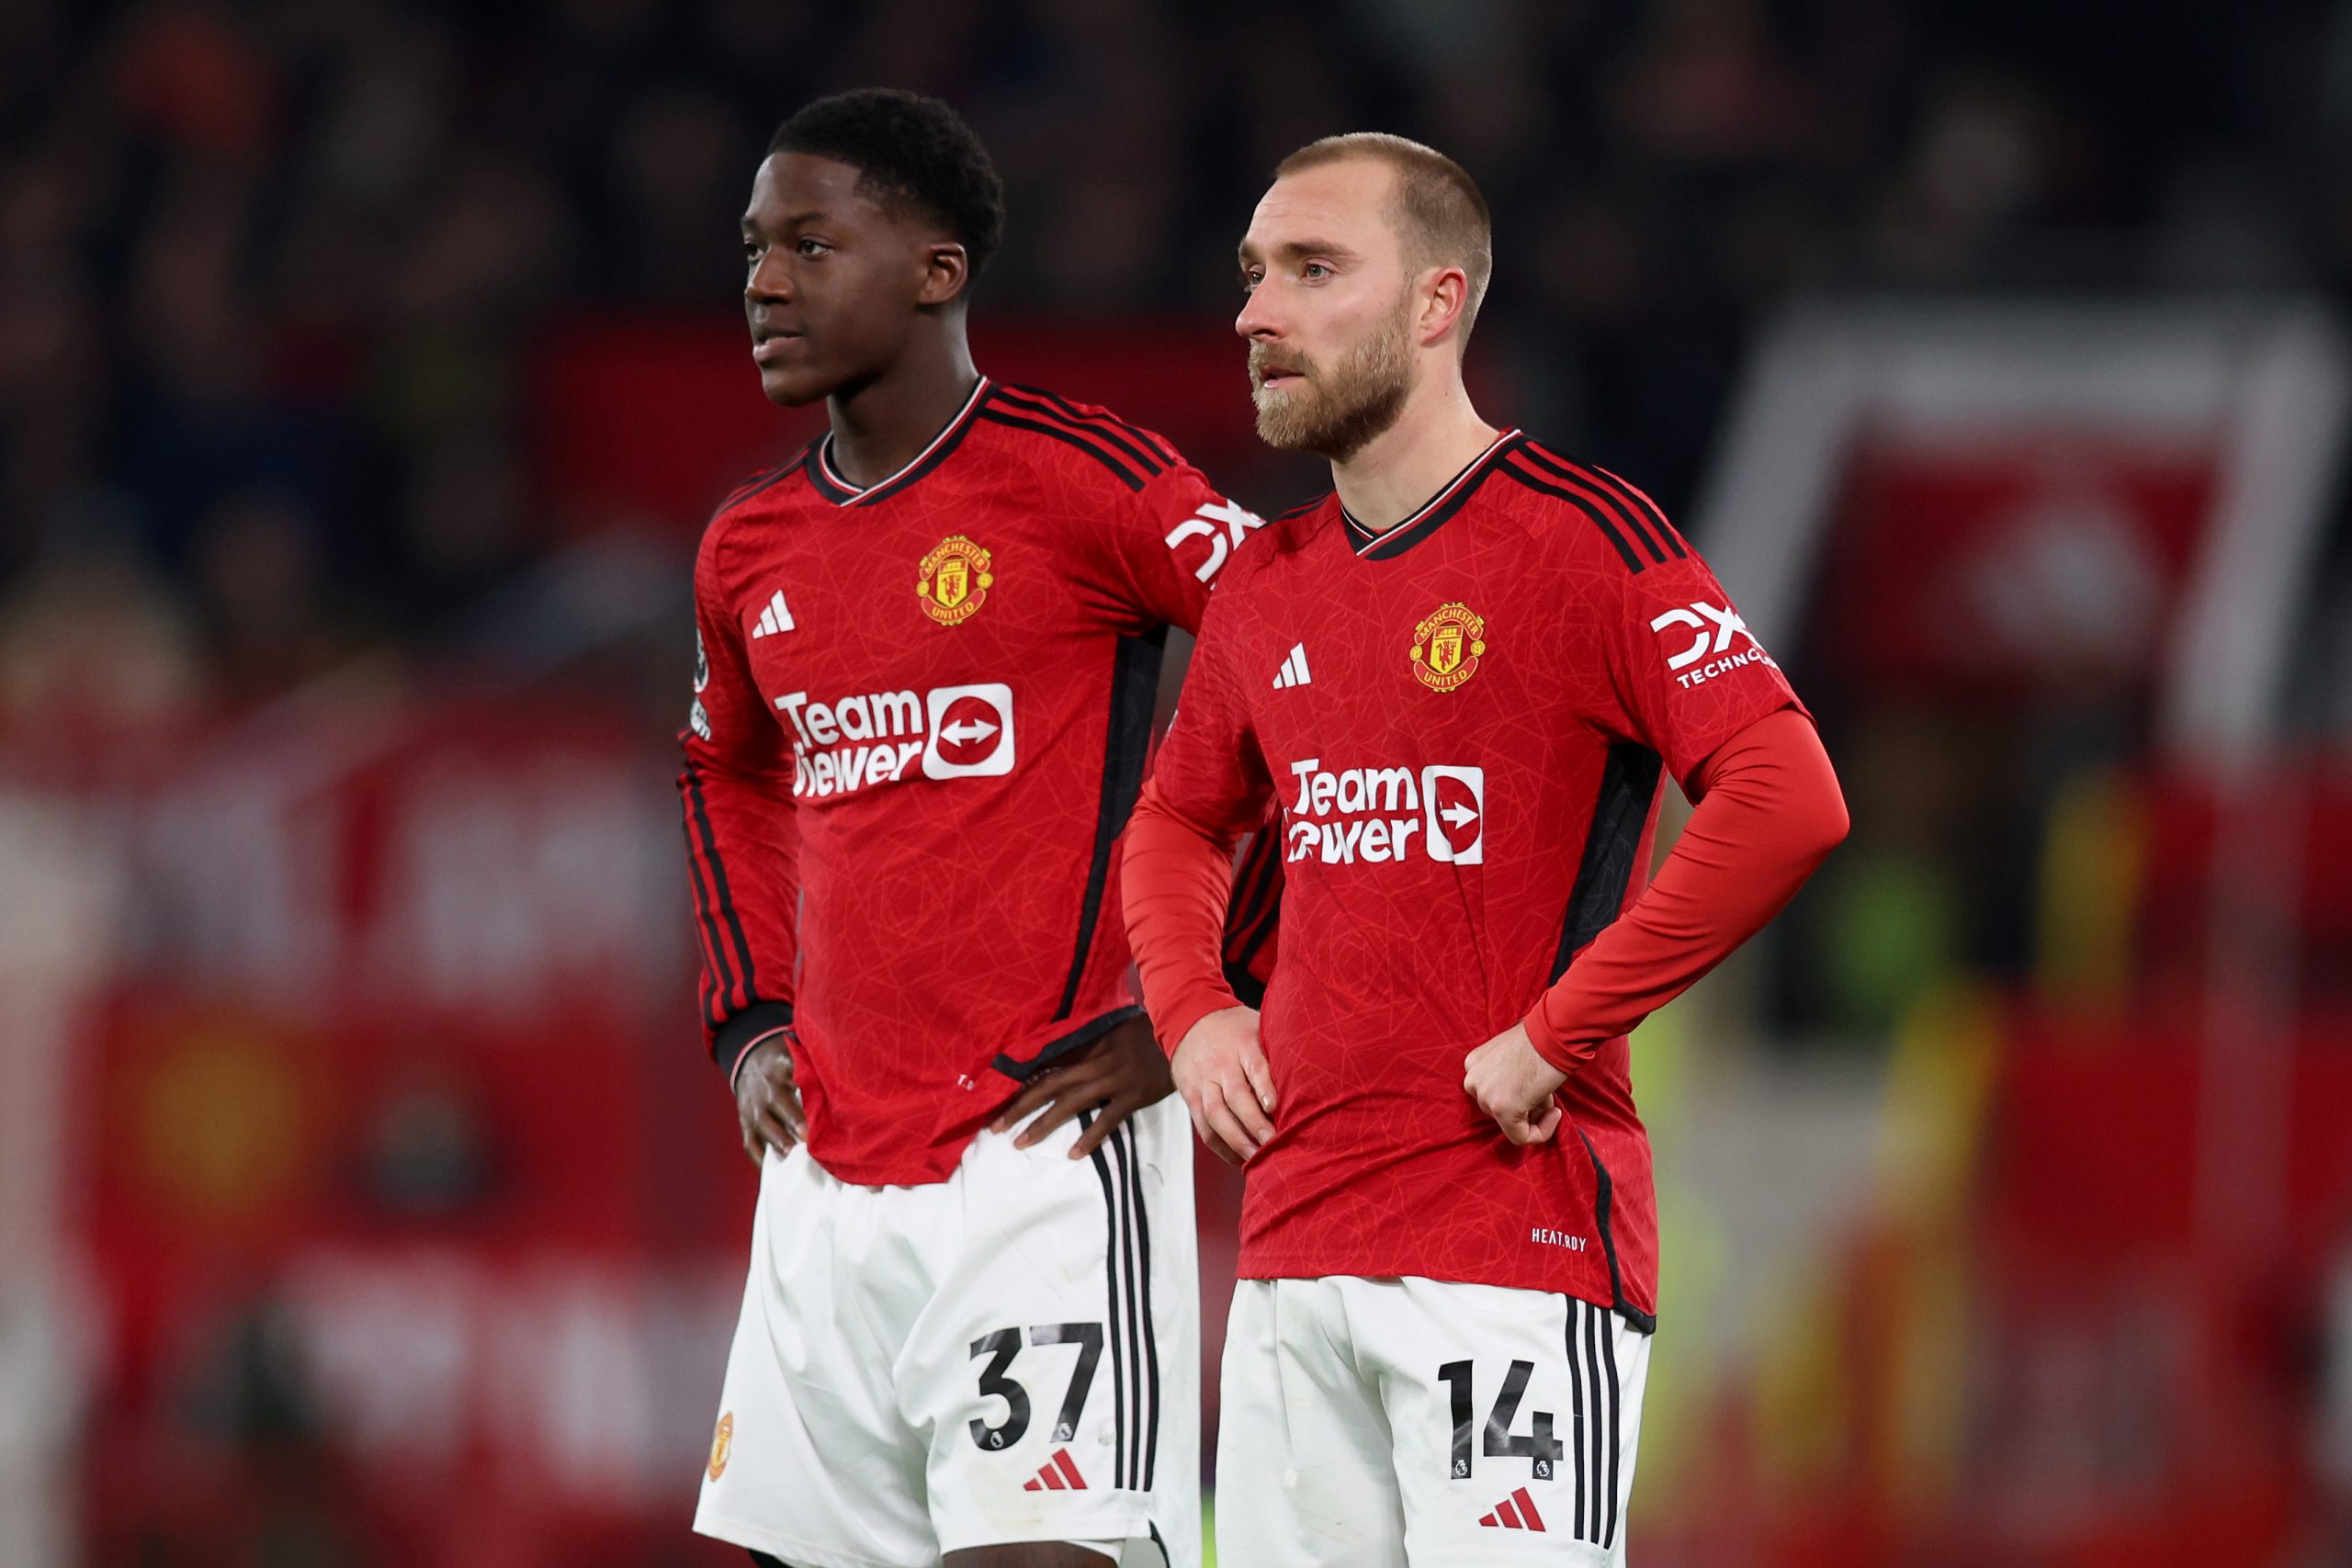 Christian Eriksen in awe of 'exceptional' Manchester United player recently favoured by Erik ten Hag